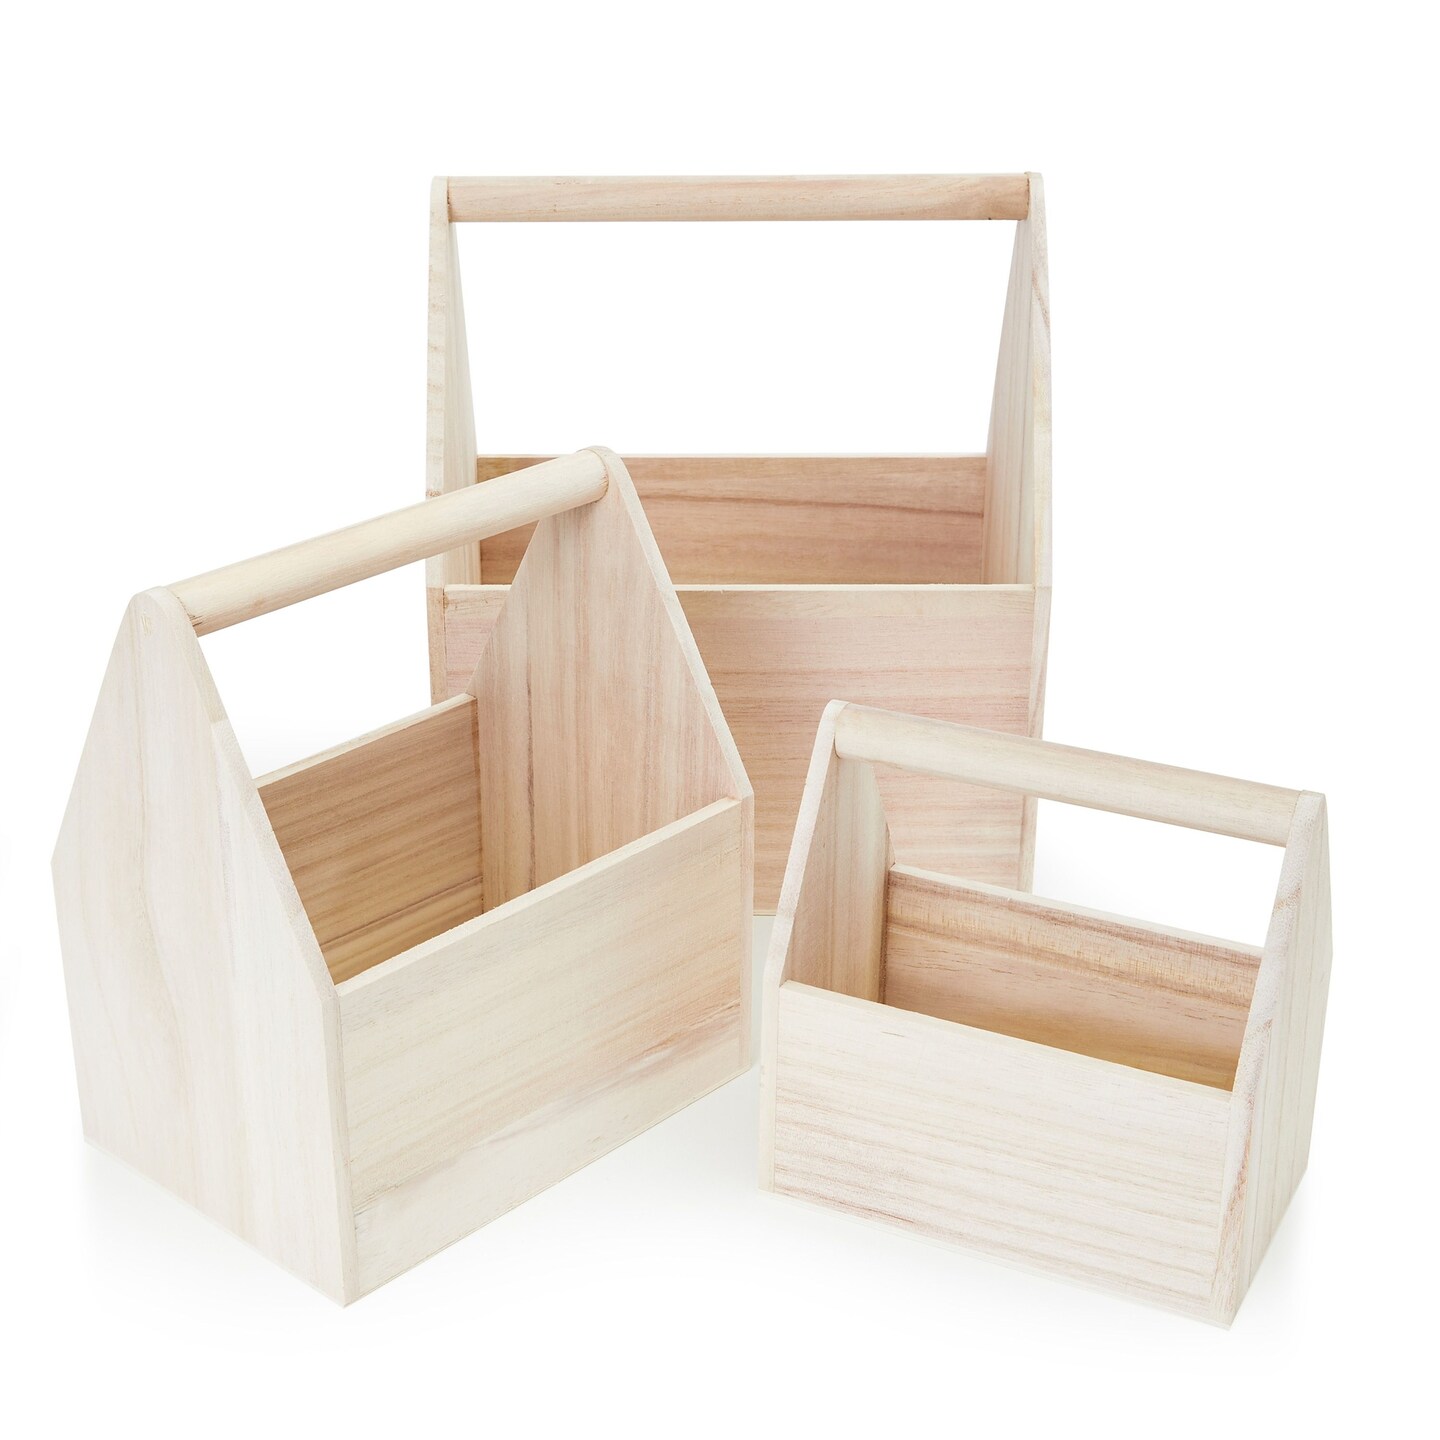 Wood Box with Handle by Make Market in Unfinished Wood | 5.25 x 3.375 x 2.5 | Michaels